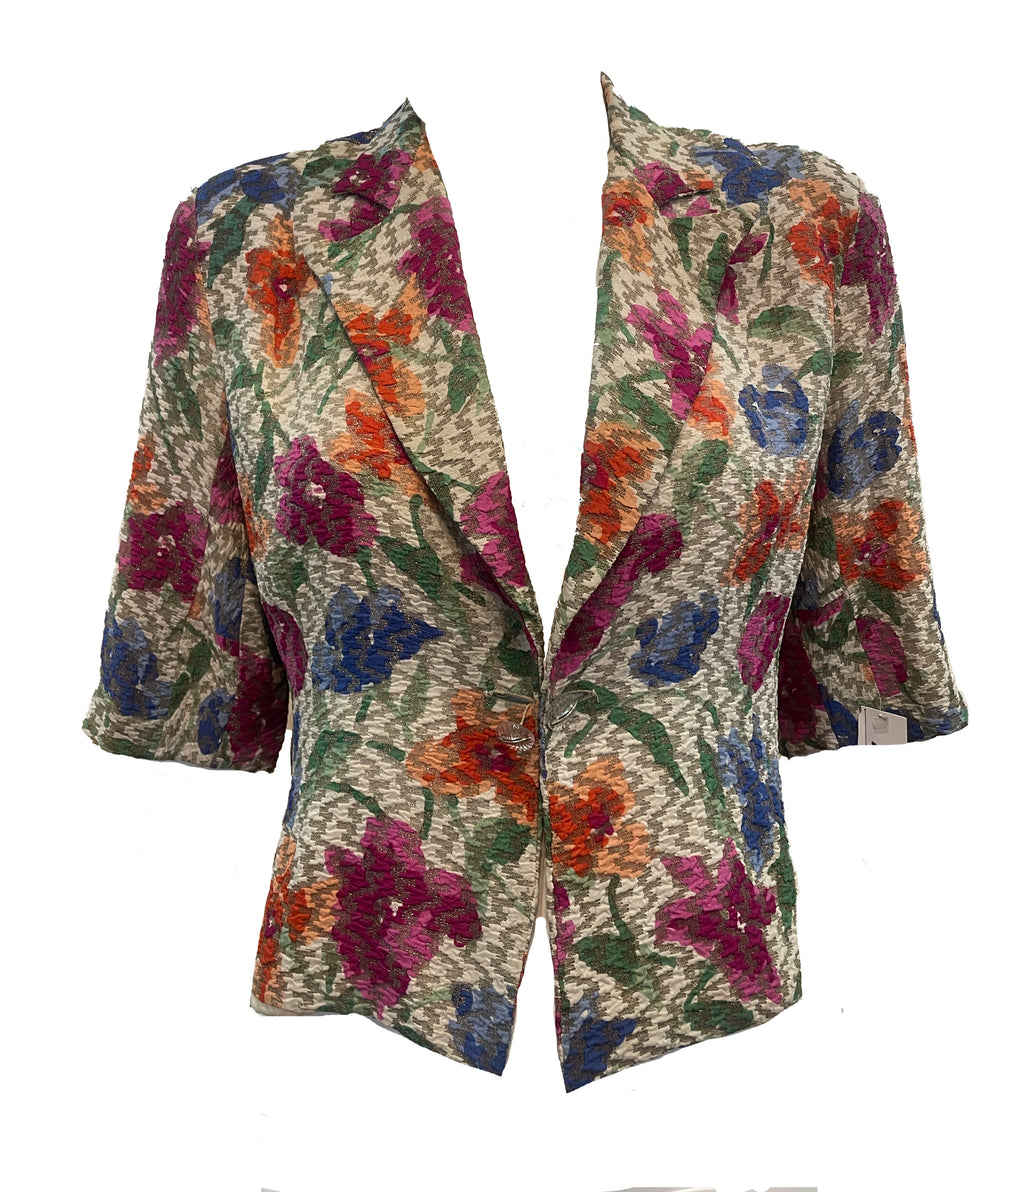 30s Gold Lame Floral Evening Jacket FRONT 1 of 5